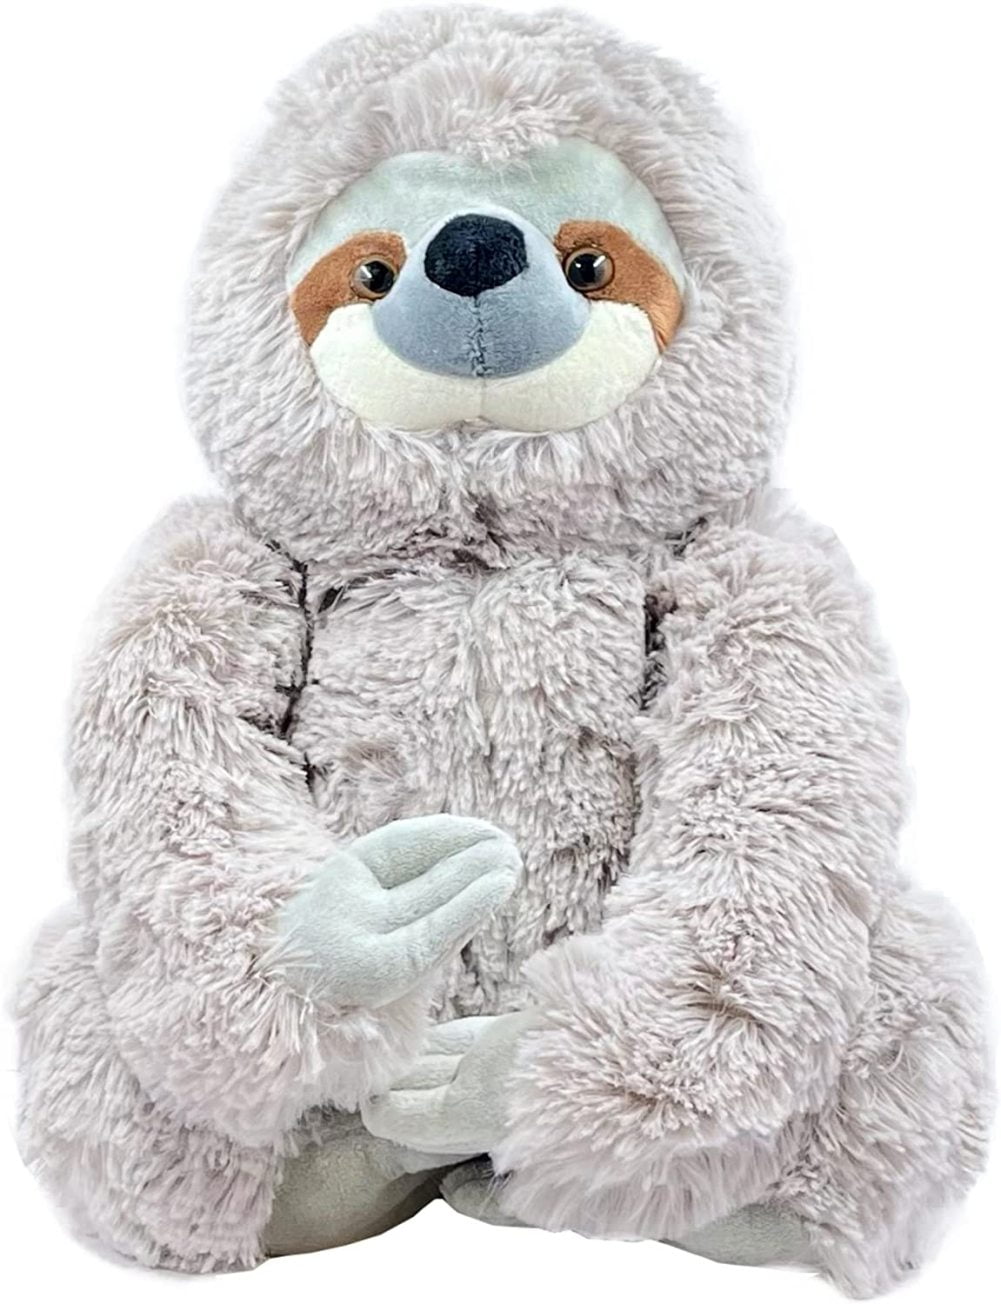 13 in KINREX Three Toed Sloth Stuffed Animal Super Realistic Floppy Large Plush for sale online 